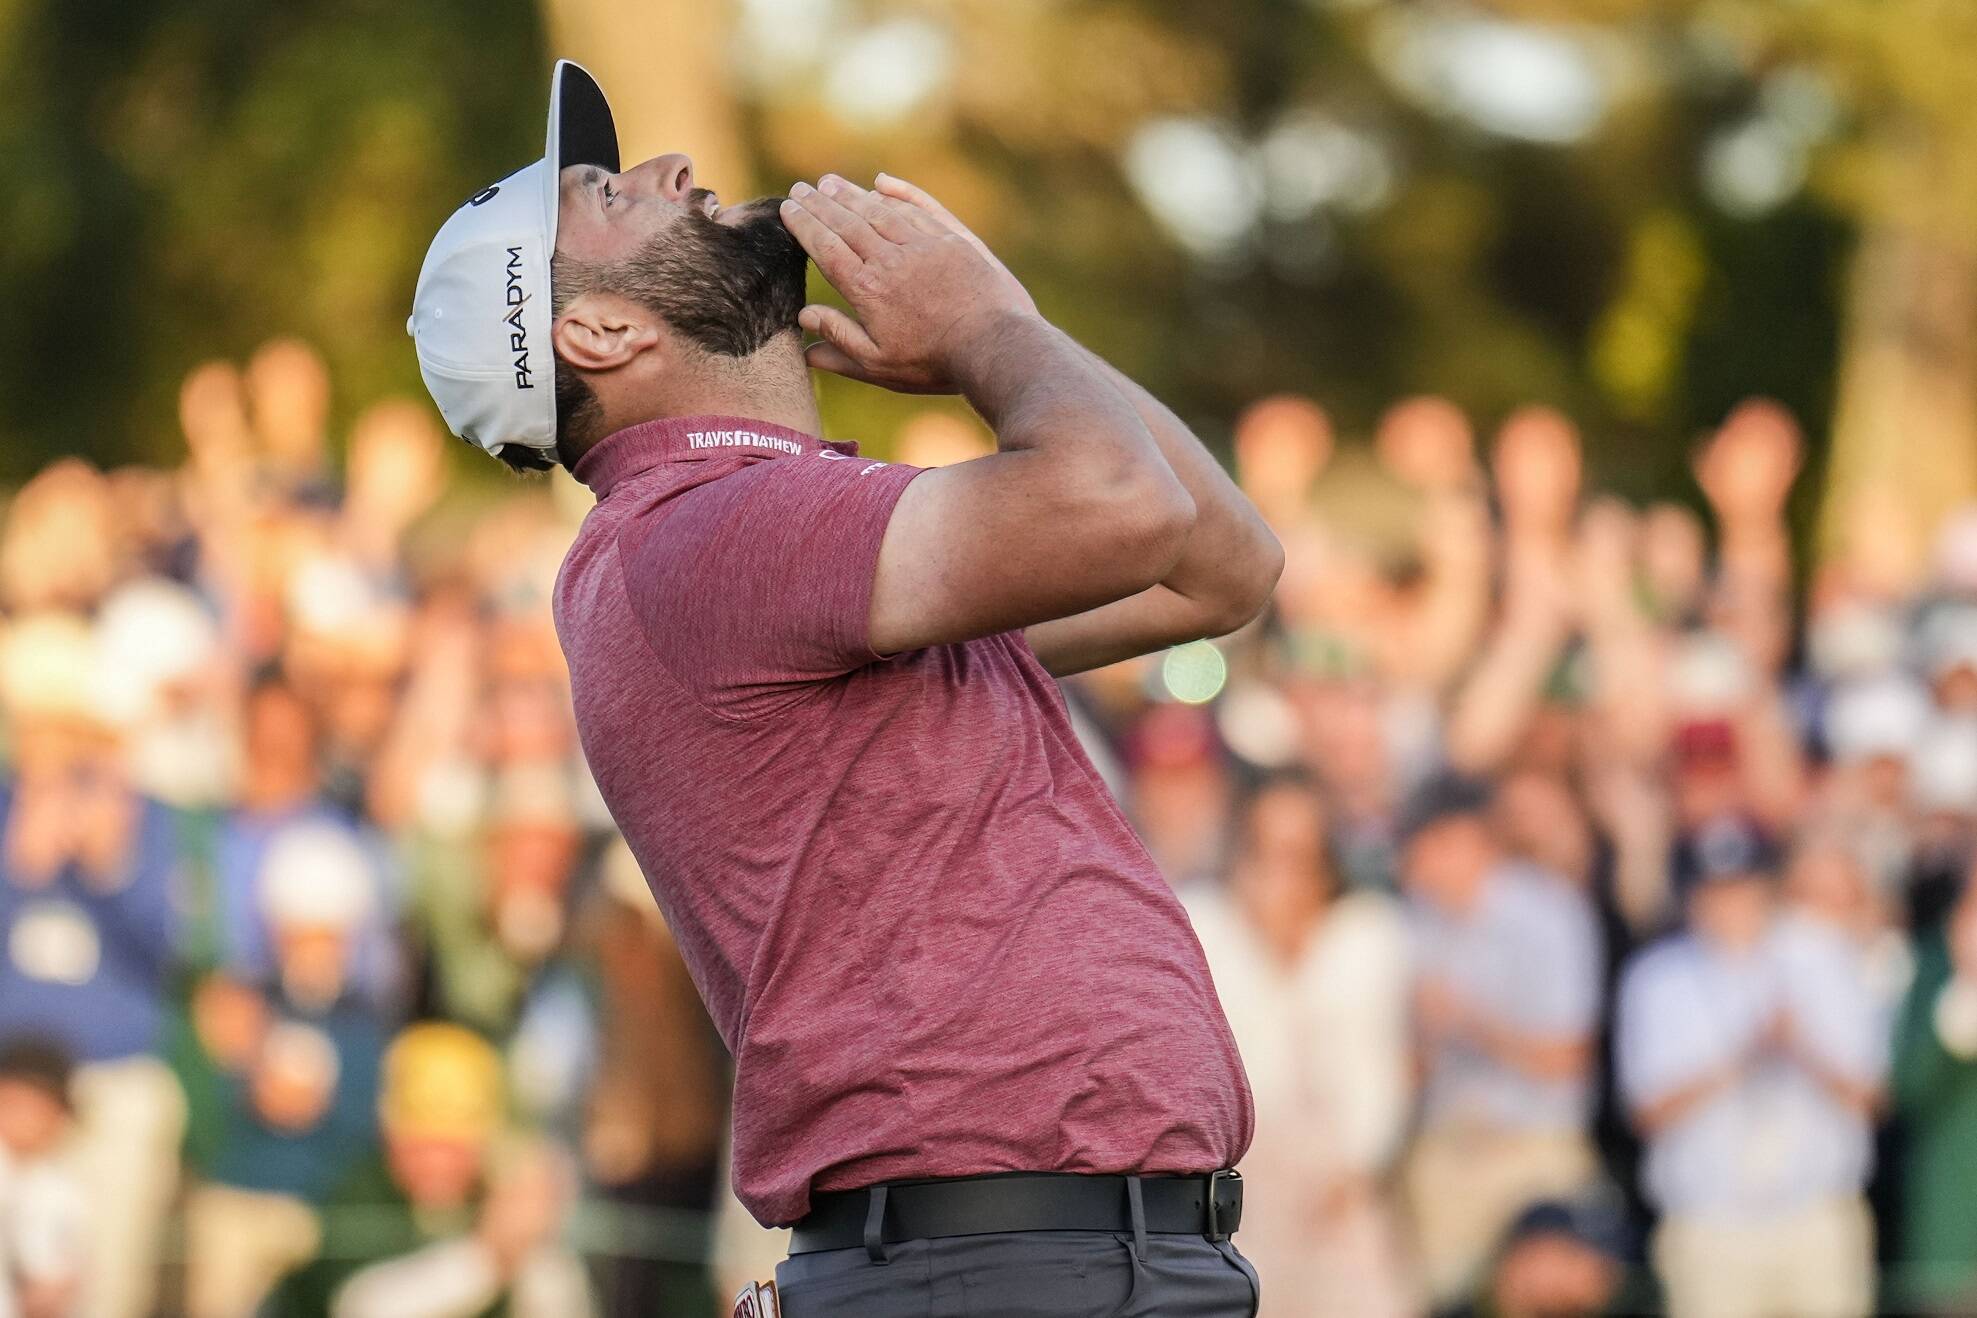 Jon Rahm, of Spain, celebrates on the 18th green after winning the Masters golf tournament at Augusta National Golf Club on Sunday, April 9, 2023, in Augusta, Ga. (AP Photo/Charlie Riedel)